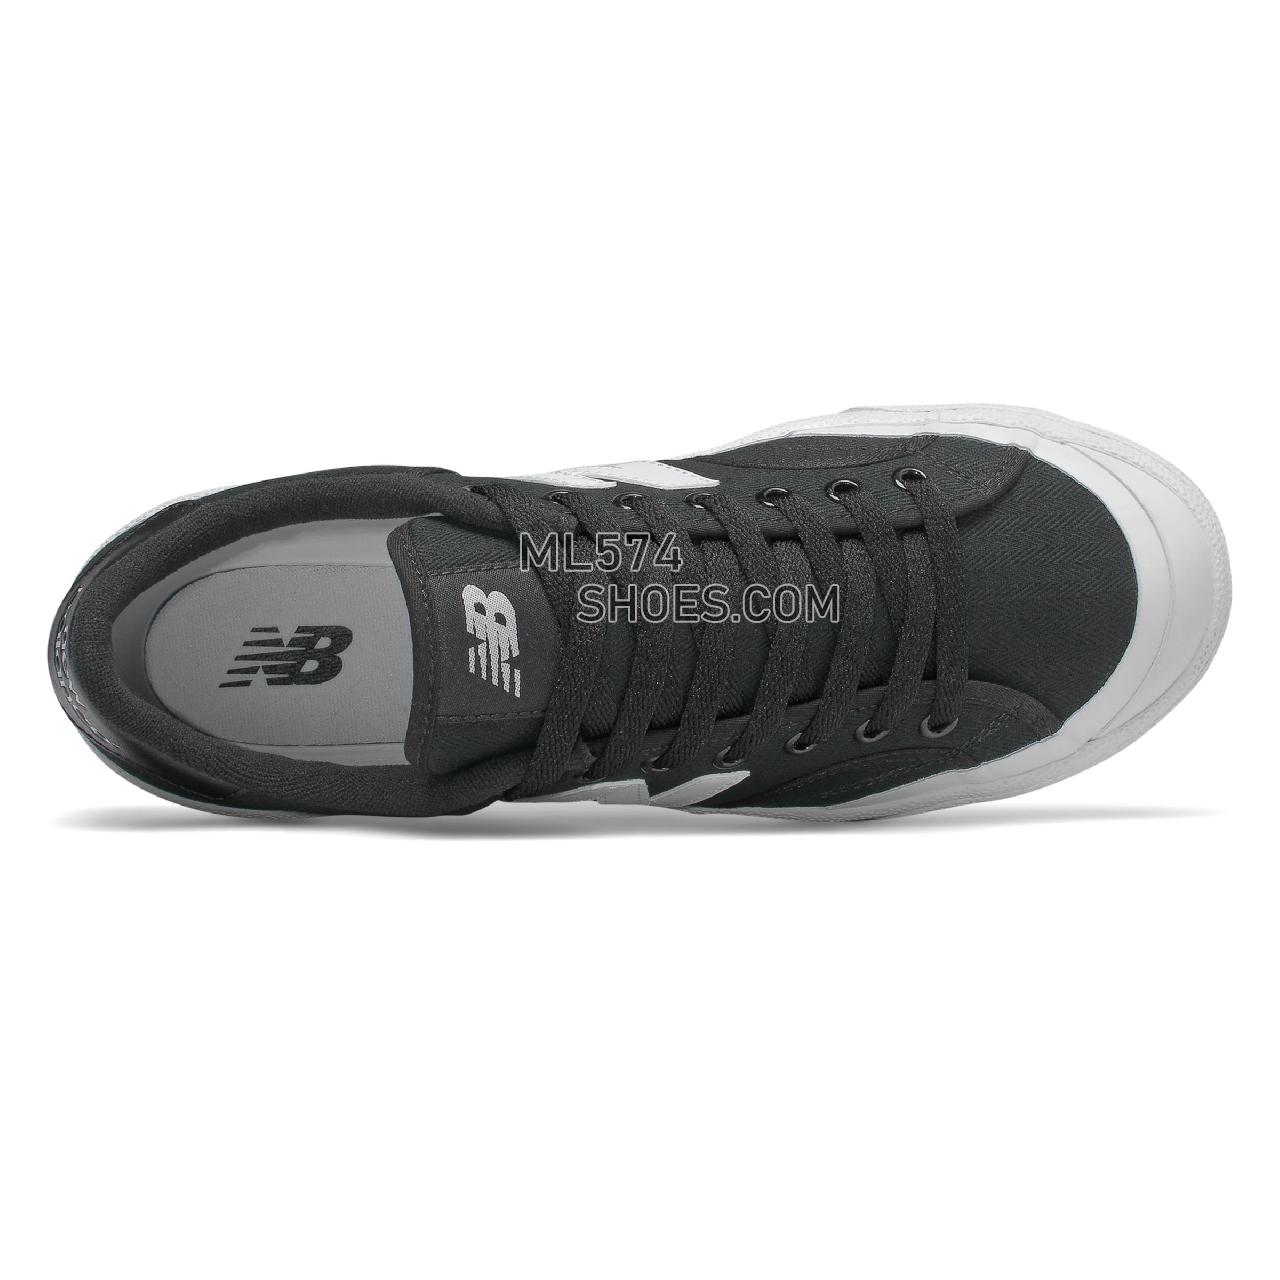 New Balance Pro Court - Men's Classic Sneakers - Black with White - PROCTSQC